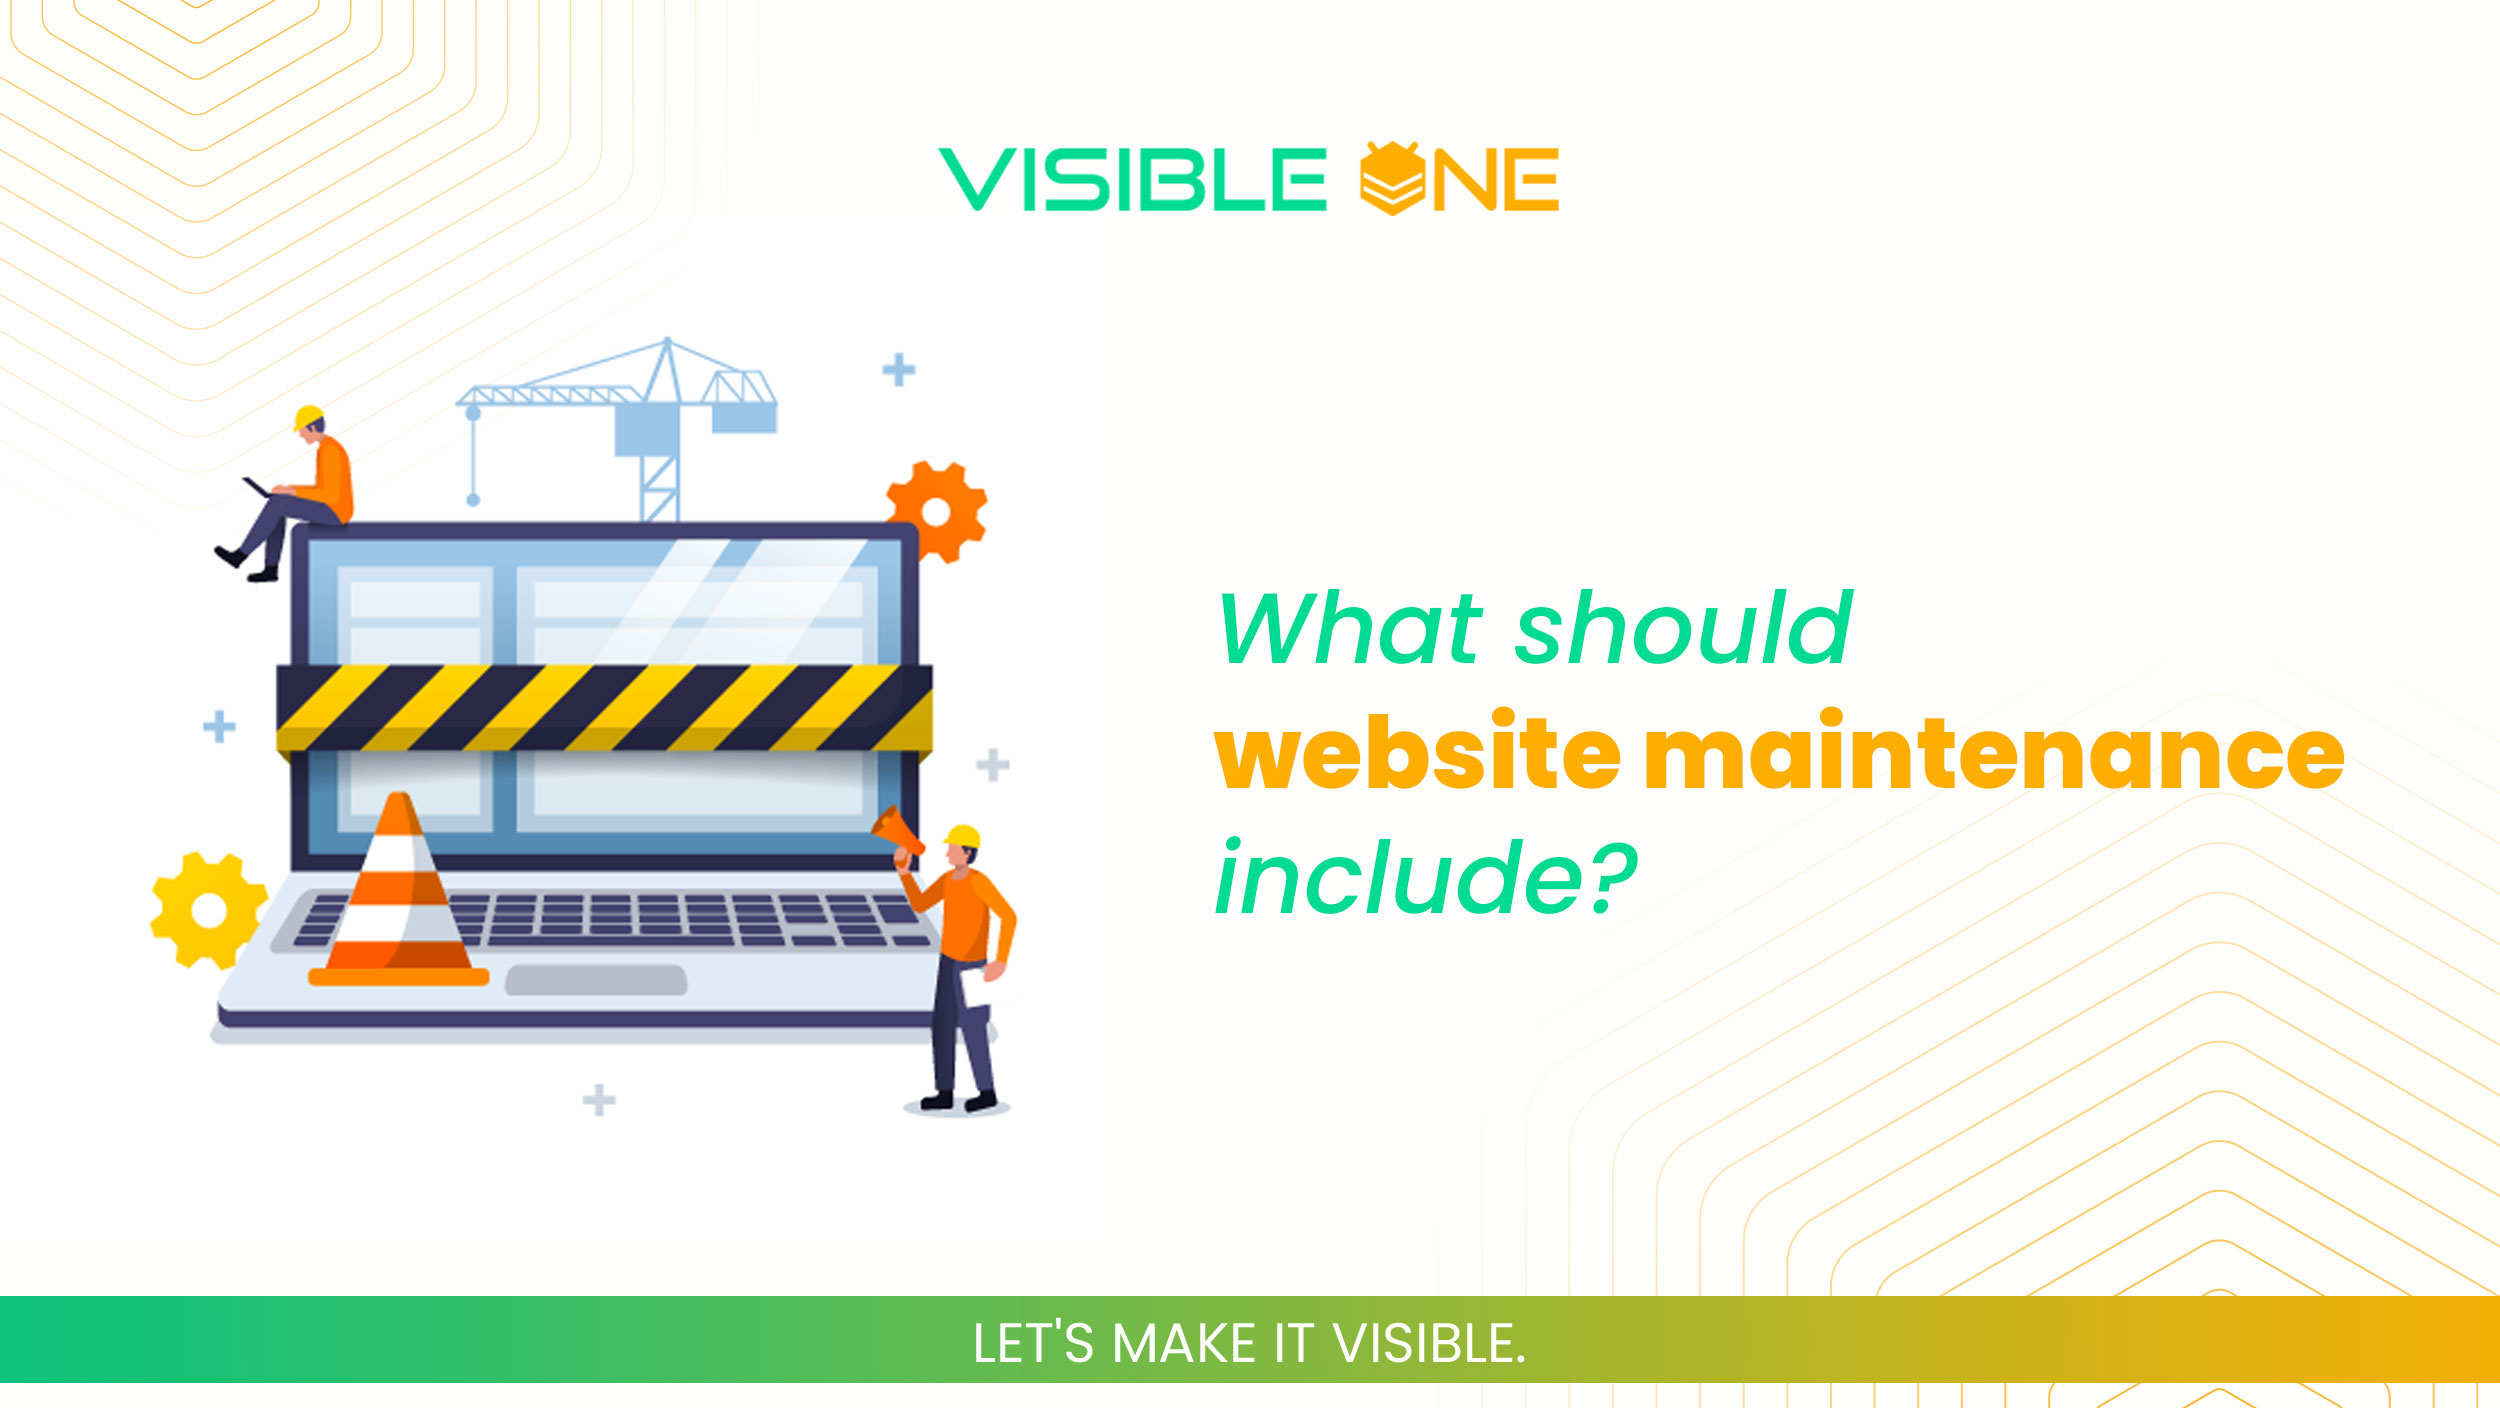 What should website maintenance include?